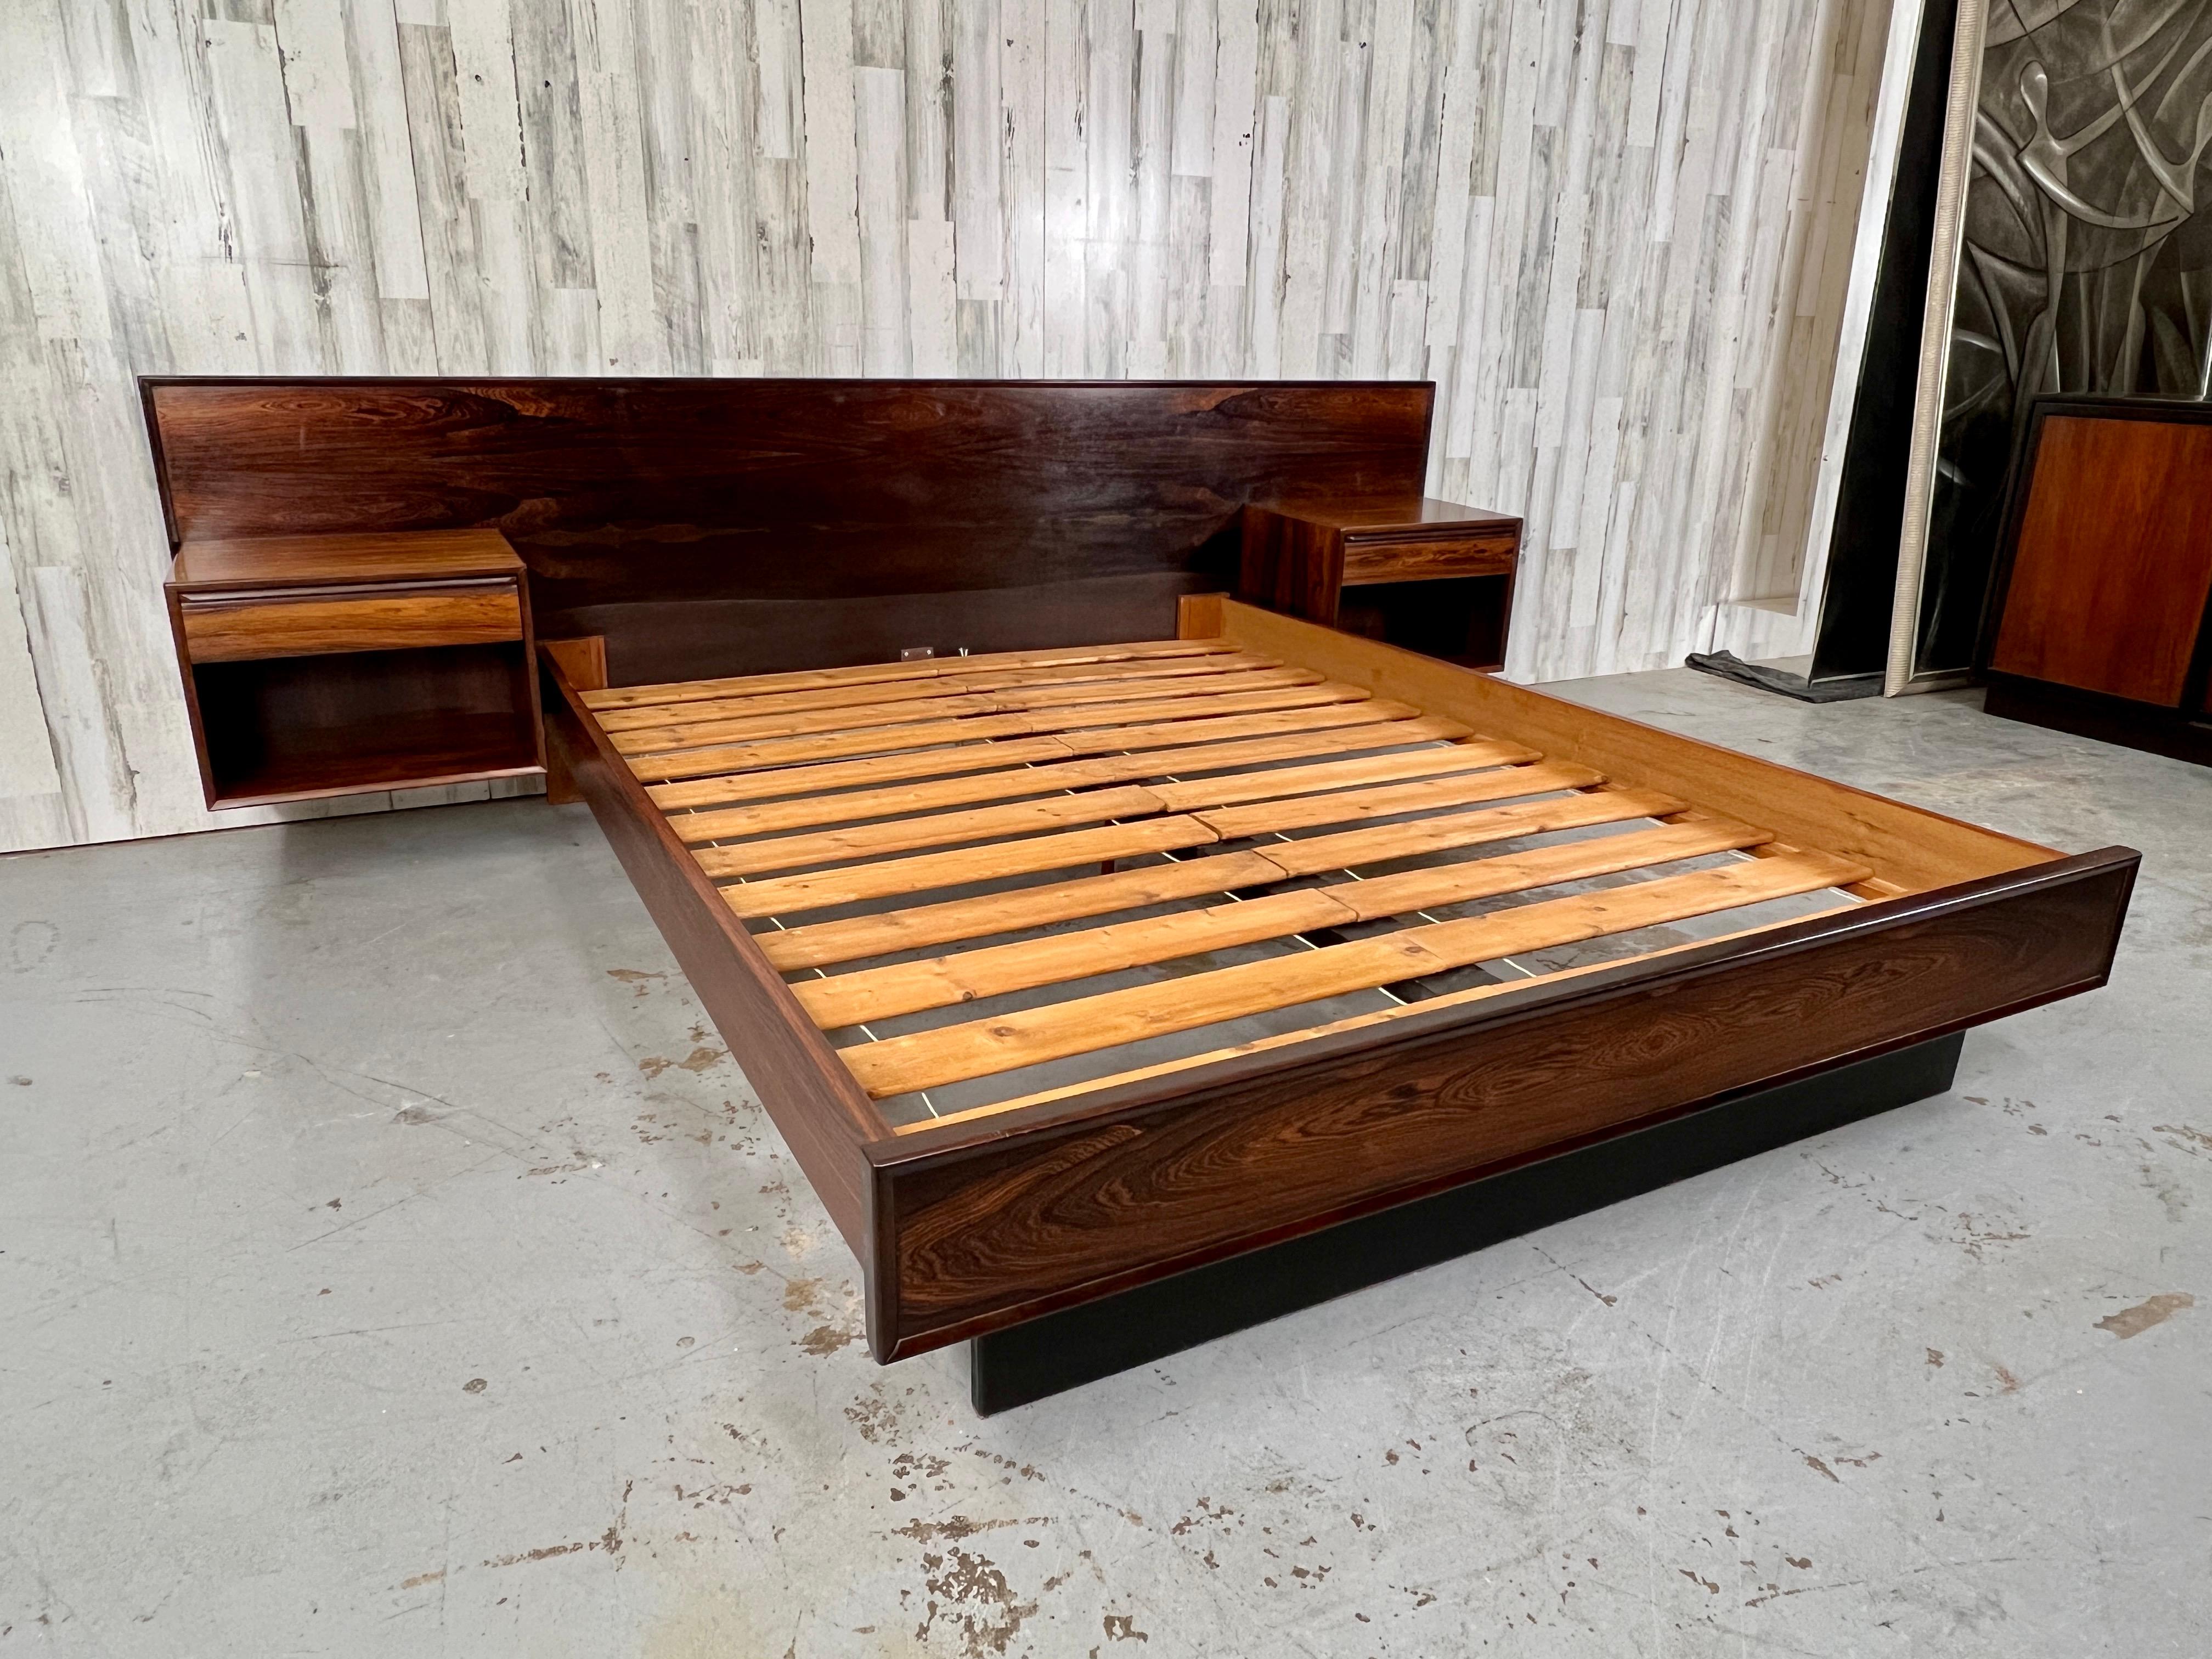 Westnofa Rosewood Floating Bed & Night Stands.
Inside rails measure: 61.25 L x 81.39 D
Height floor to foot board: 13.88 H
Each nightstand measures: 21.75 H x 20.75 W x 15.63 D